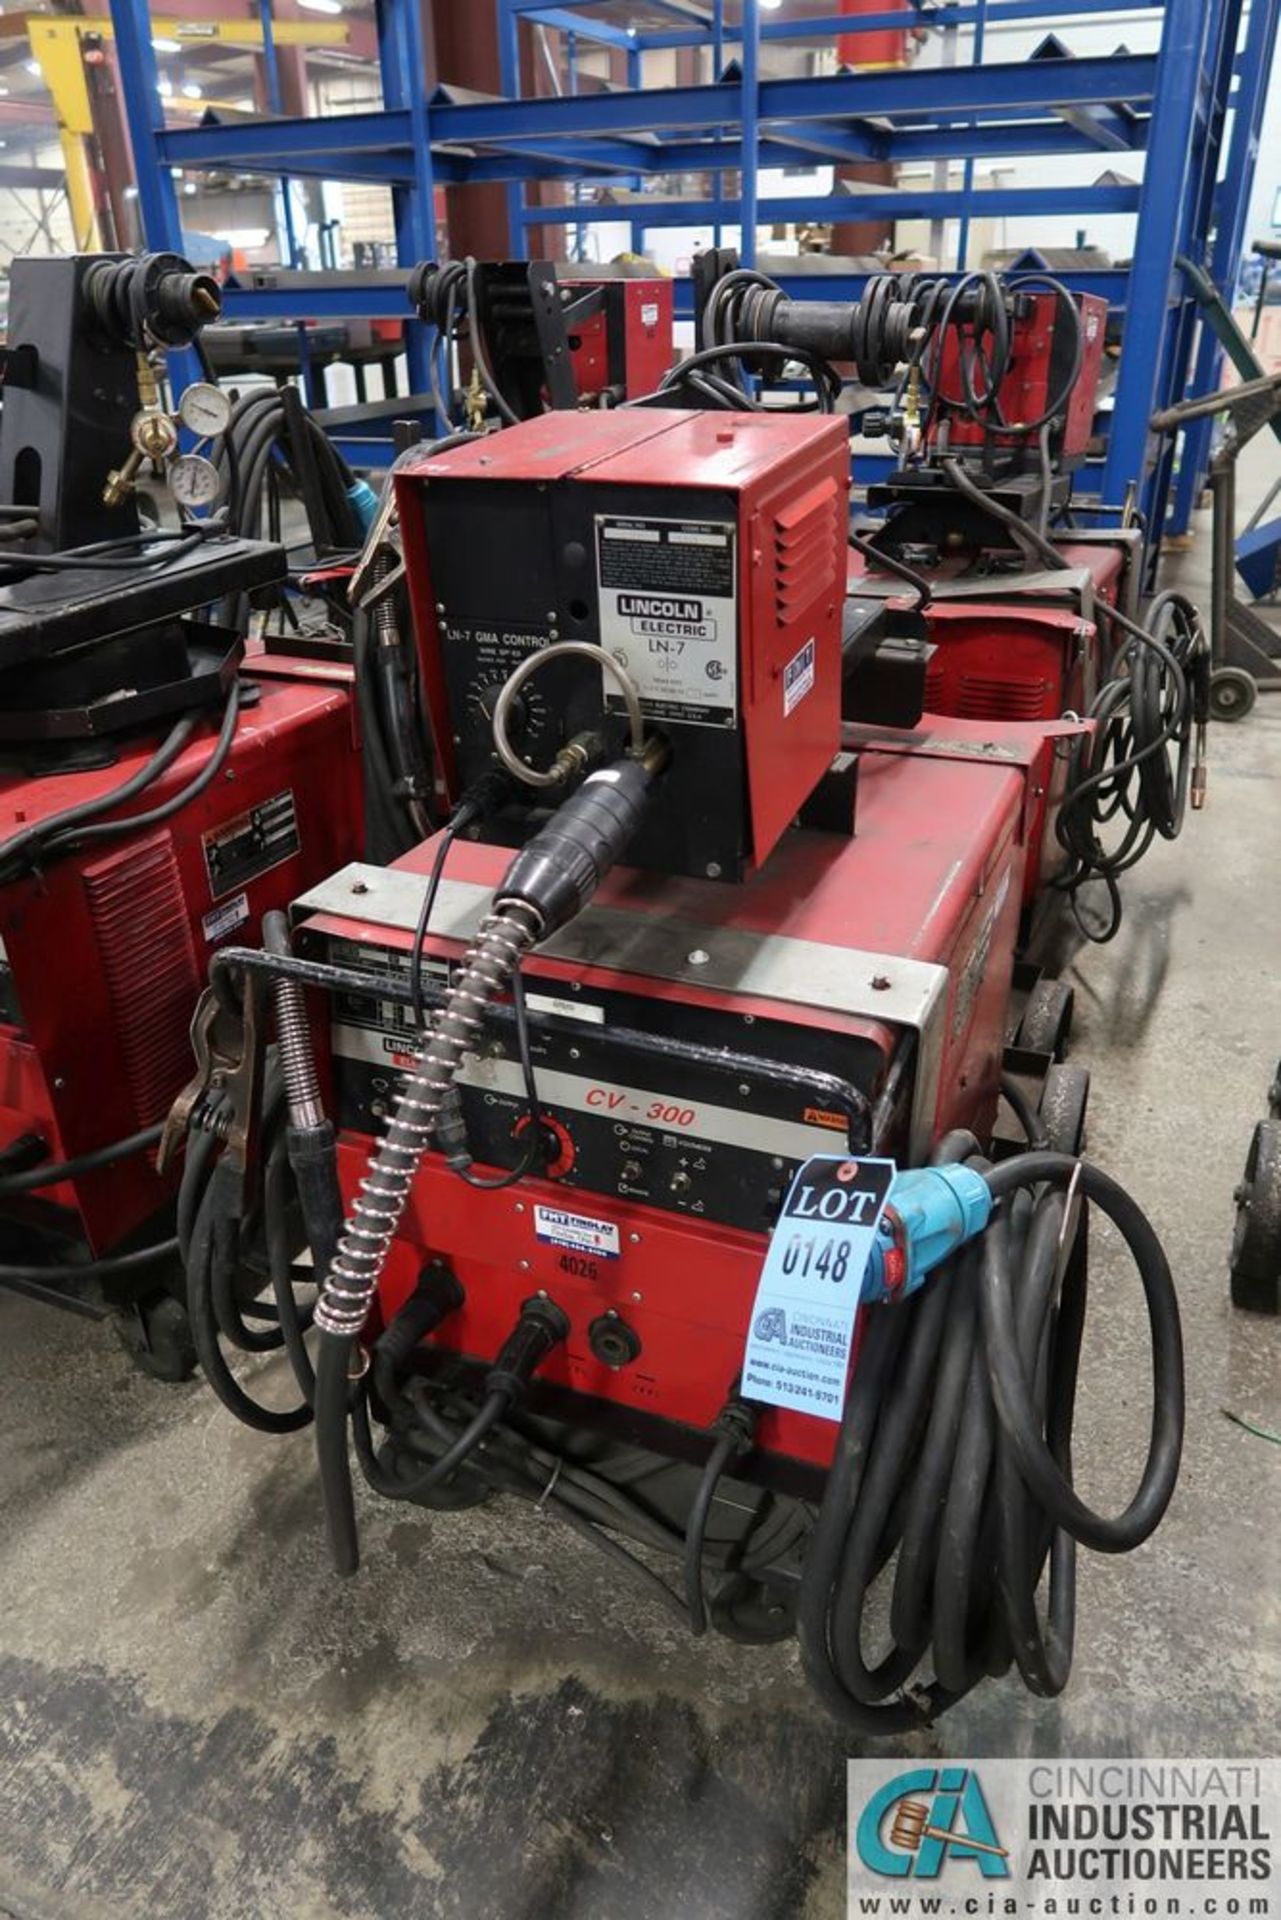 300 AMP LINCOLN CV-300 WELDER; S/N U1980308092, WITH LINCOLN LN-7 WIRE FEED - Image 2 of 7